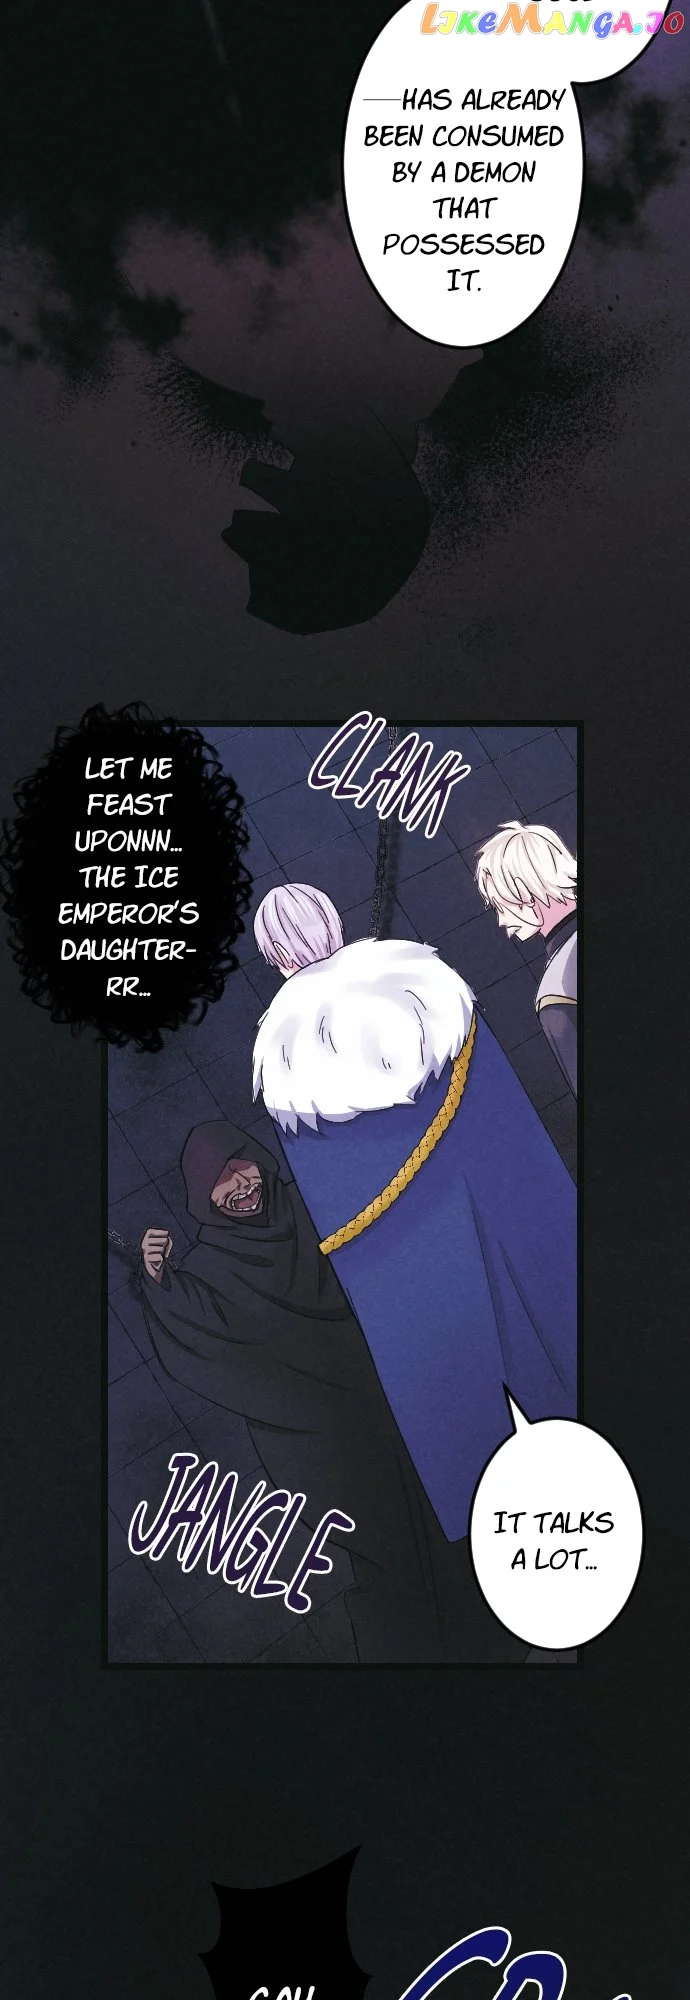 It’s Not Easy Being the Ice Emperor’s Daughter chapter 10